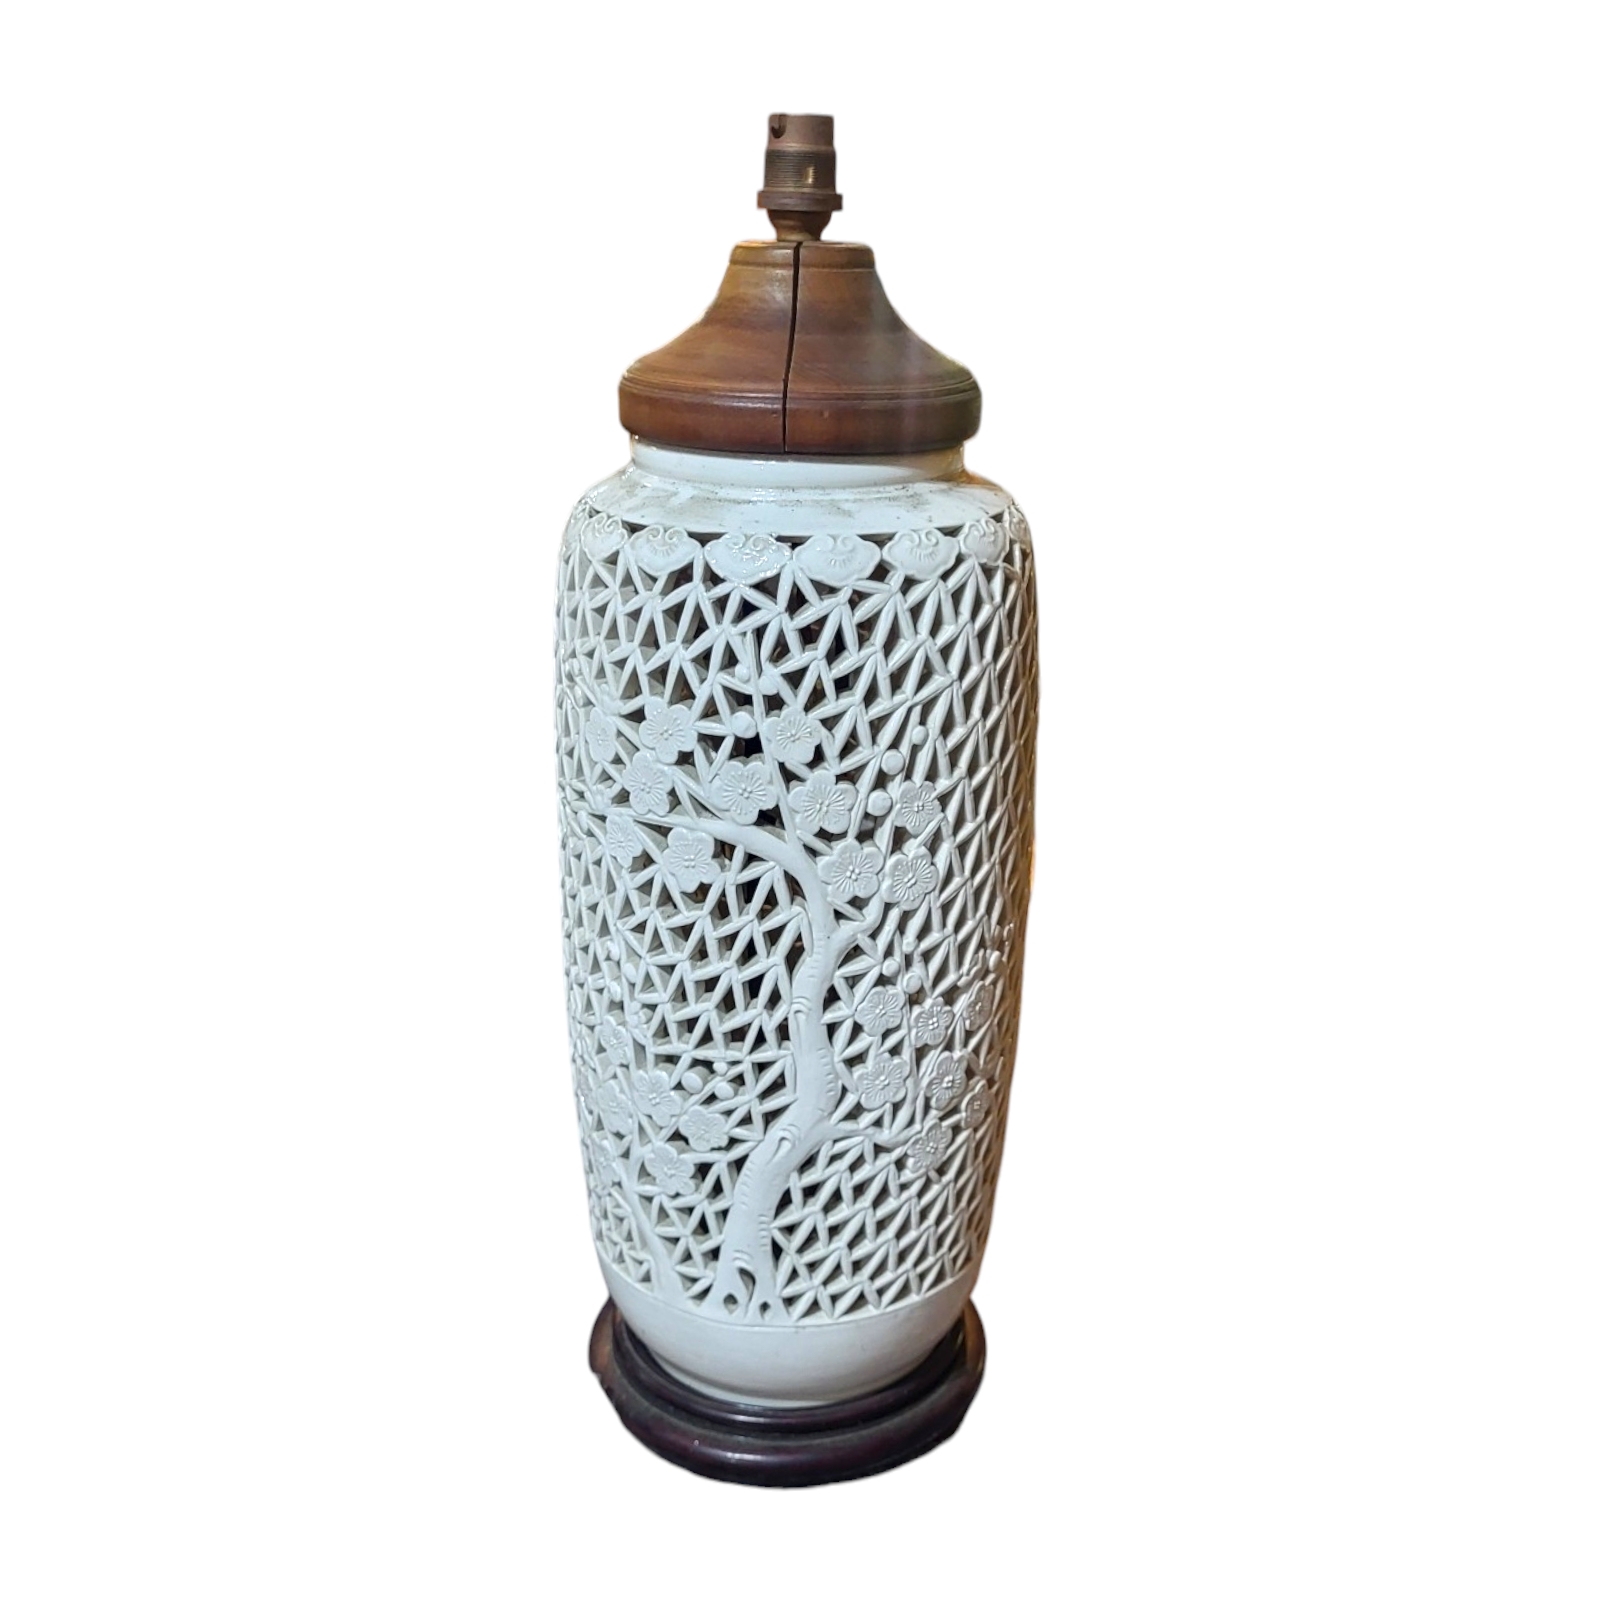 A CHINESE LATE QING DYNASTY BLANC DE CHINE PORCELAIN RETICULATED LAMP Decorated with openwork - Image 2 of 3